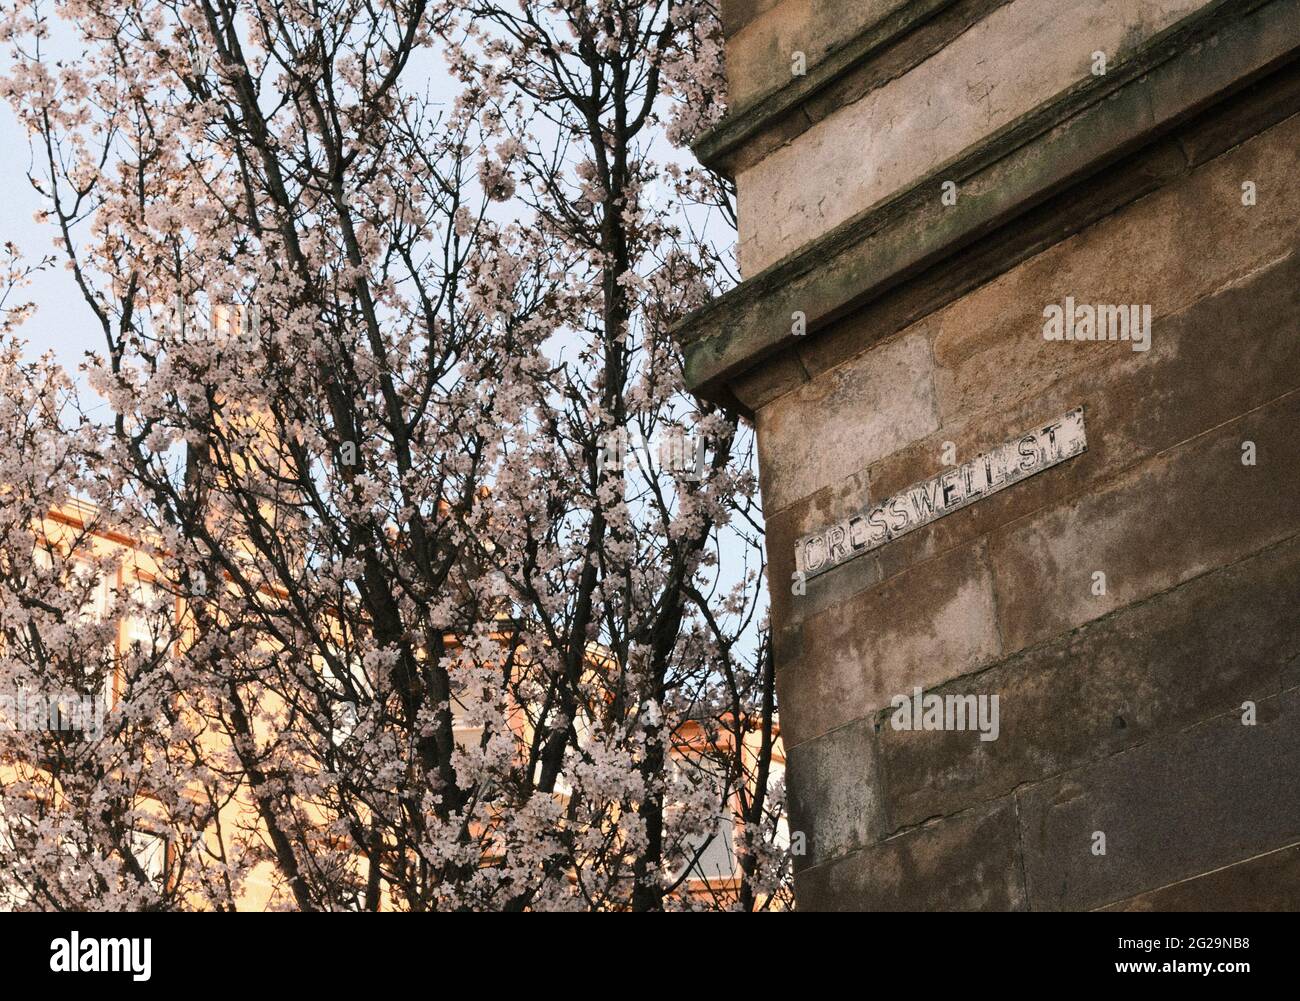 Blossom tree in spring, Cresswell Street, Glasgow Stock Photo